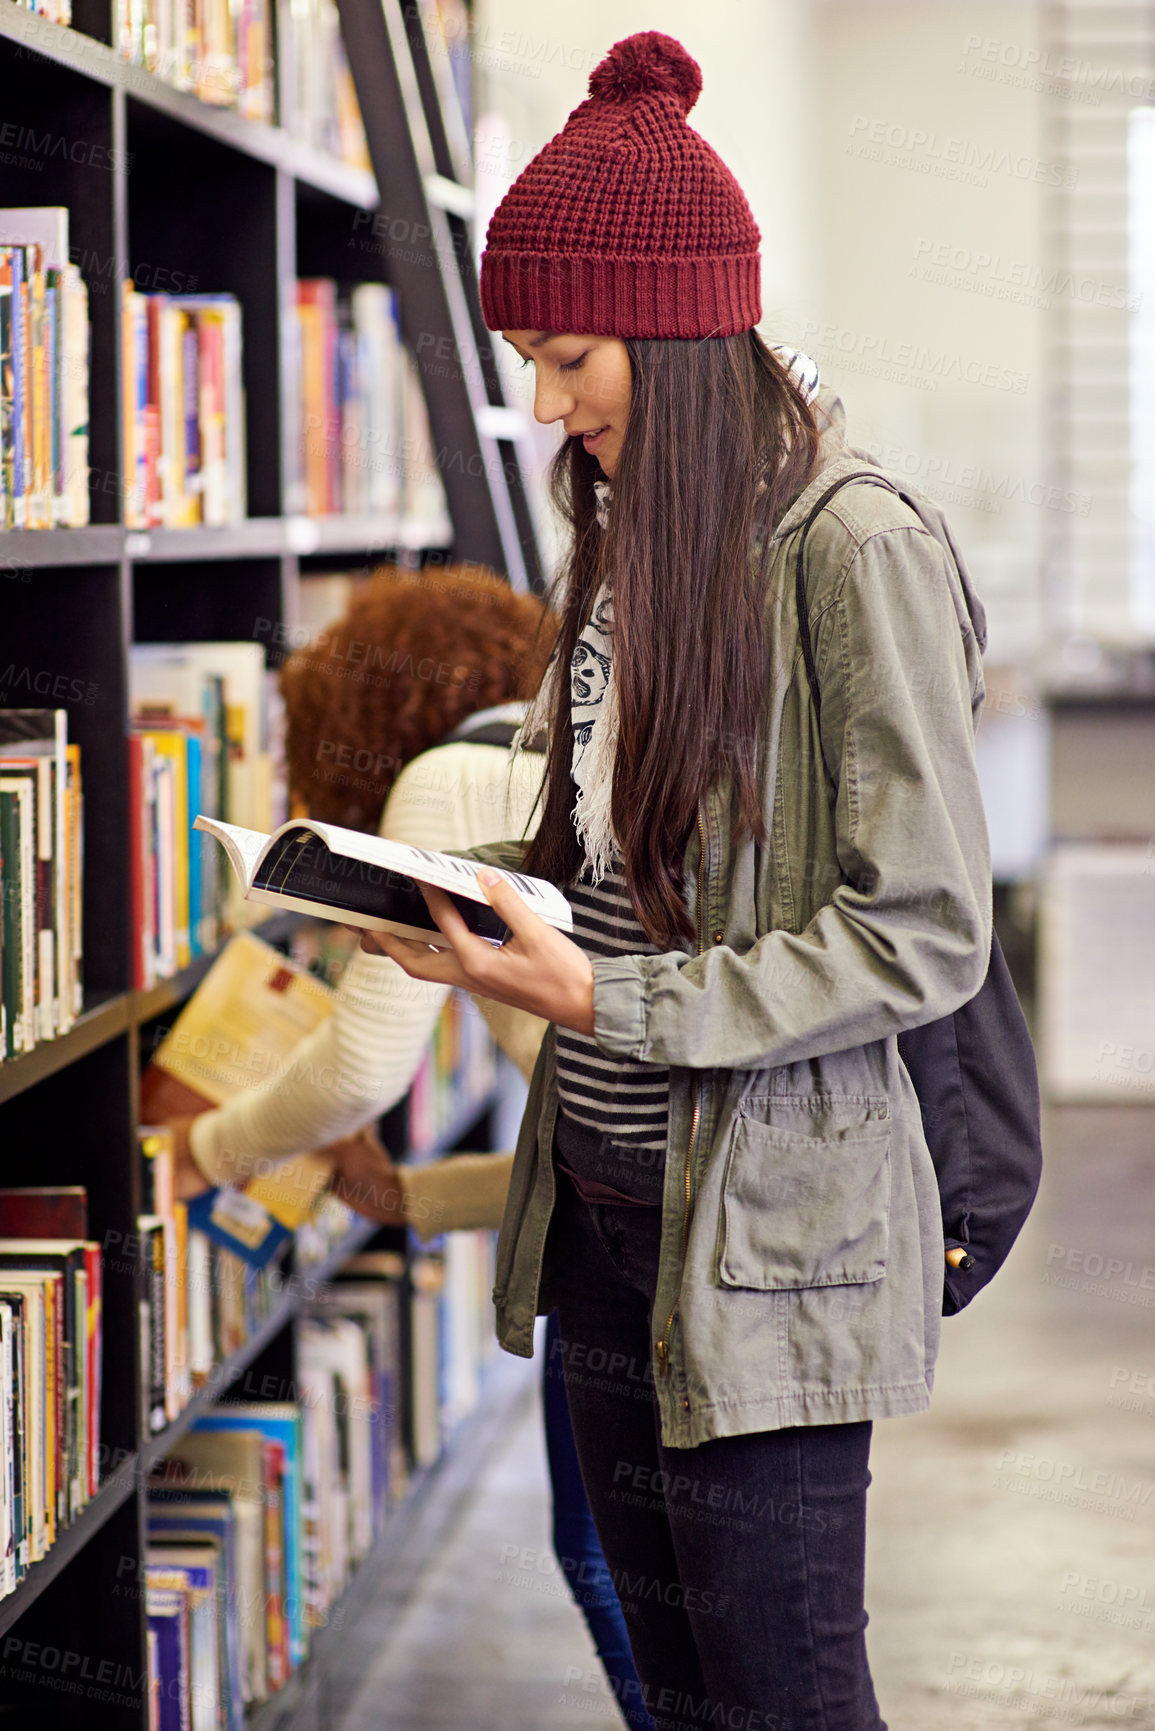 Buy stock photo Shot of a young woman studying from a book while standing by a library bookshelf